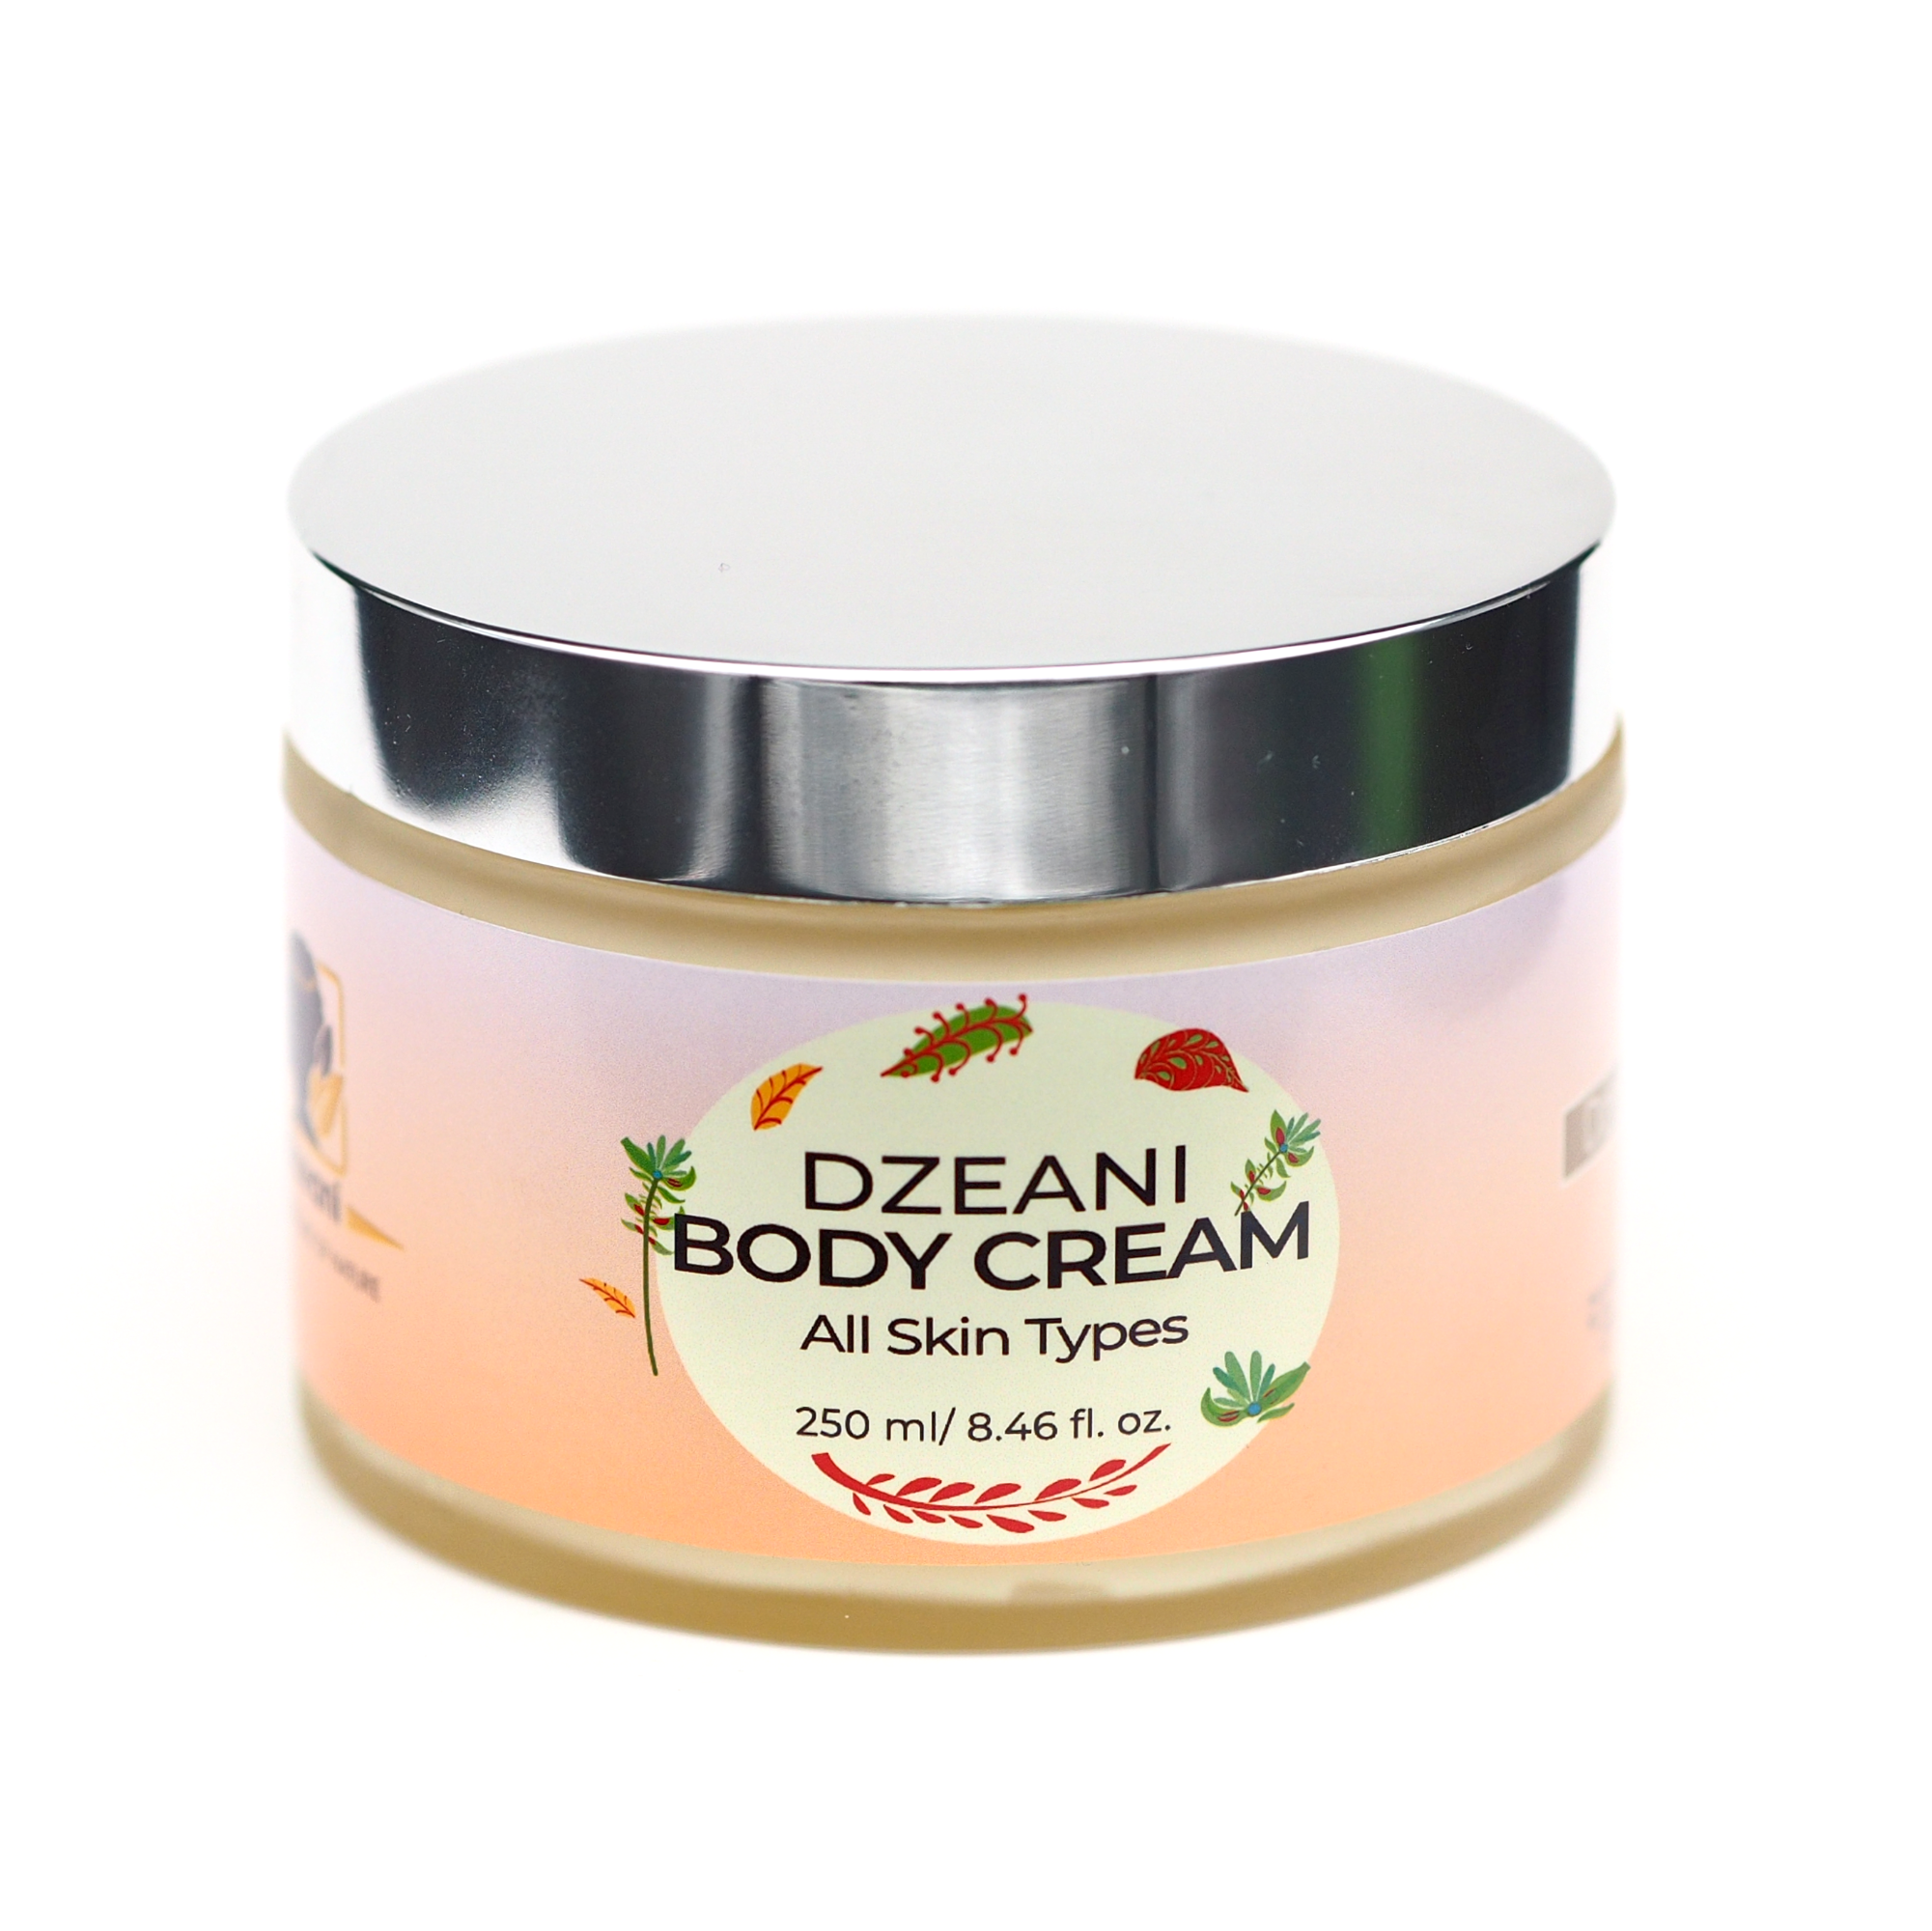 Dzeani Body Cream is for anyone looking for a body cream that provides deep hydration and nourishment to the skin